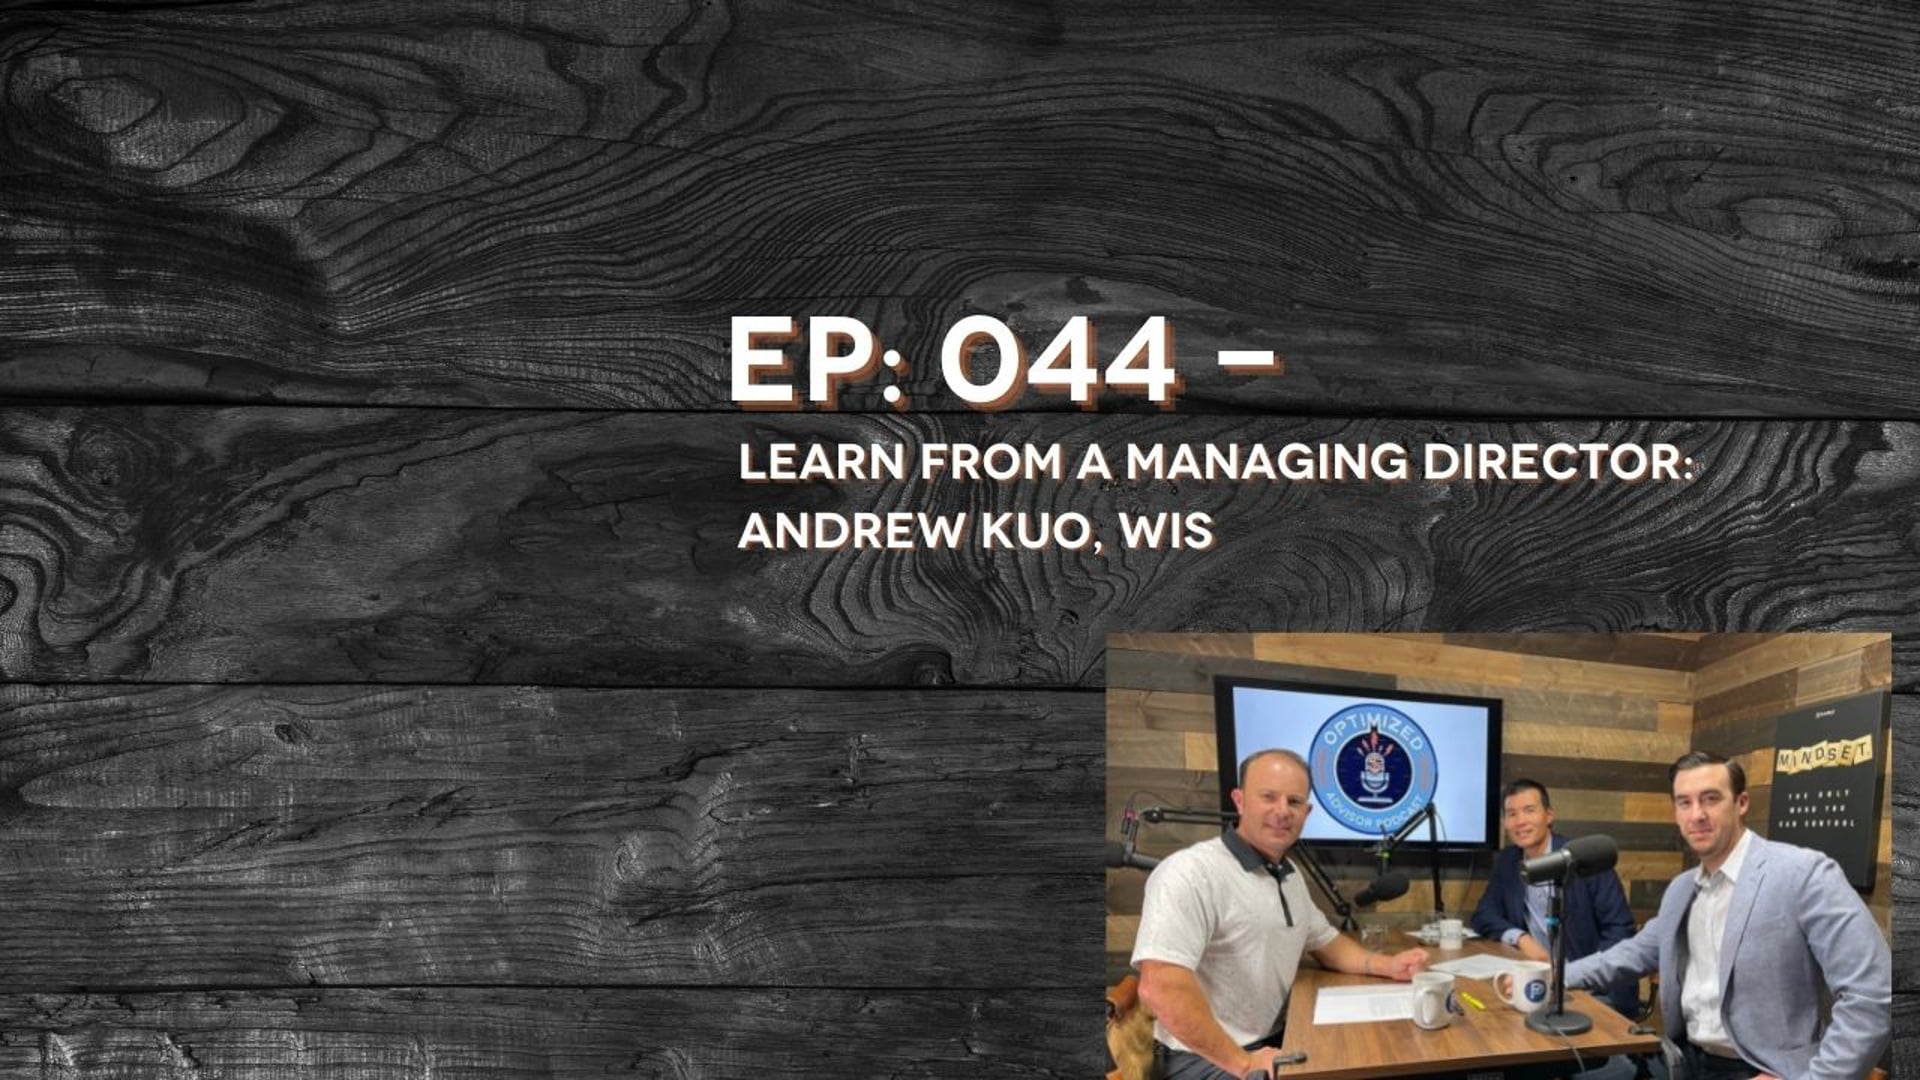 Learn From A Managing Director: Andrew Kuo, WIS